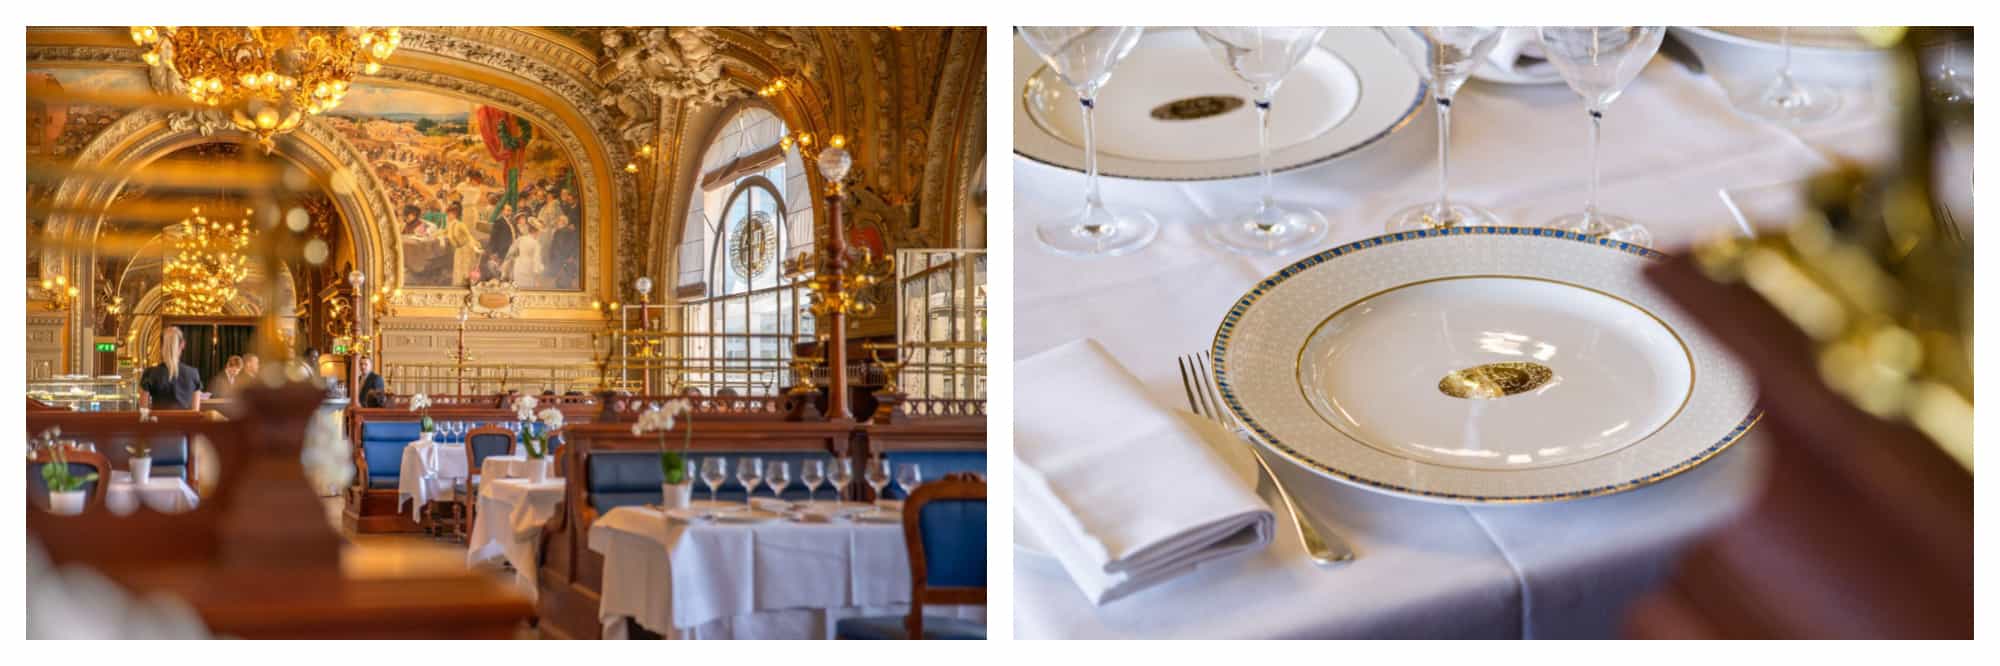 The opulent interior of the restaurant Le Train Bleu in Paris, featuring painted frescos and gold chandeliers (left). A table setting at Le Train Bleu, a white tablecloth with white napkin, cutlery, wine glasses and a white plate with blue and gold detailing and the logo of the restaurant in the middle (right).